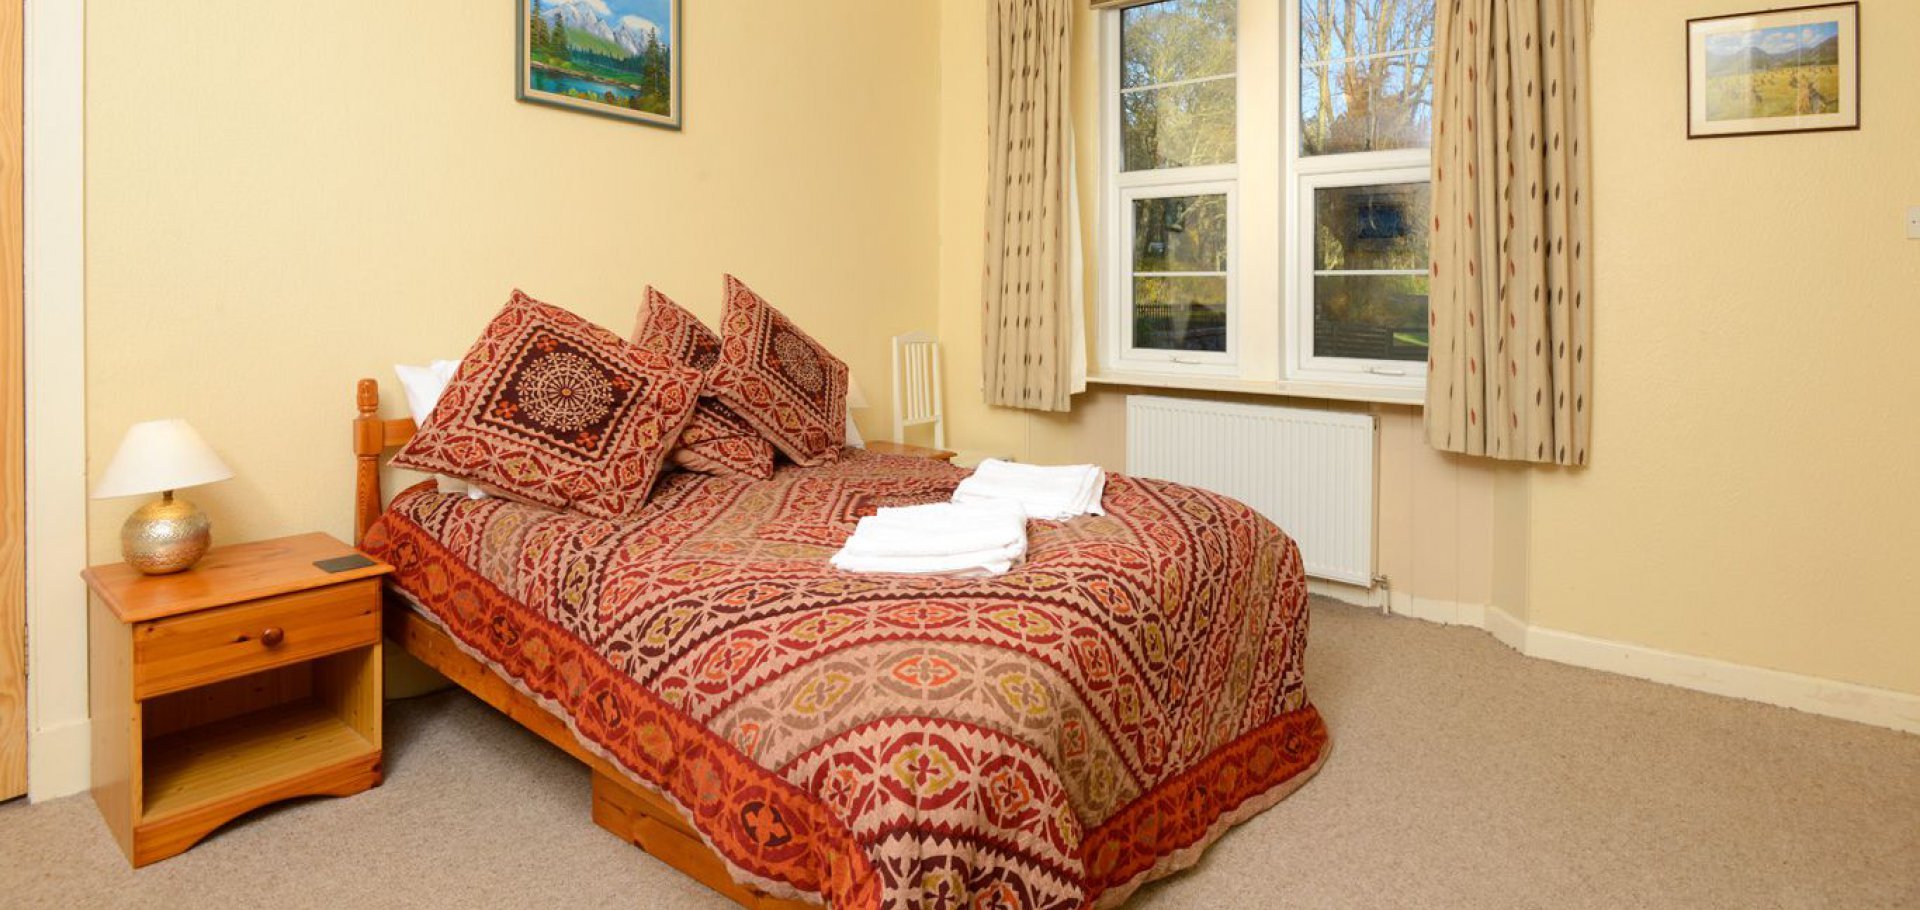 King sized double bedroom at the lodge self catering holiday cottage near castle douglas in dumfries and galloway